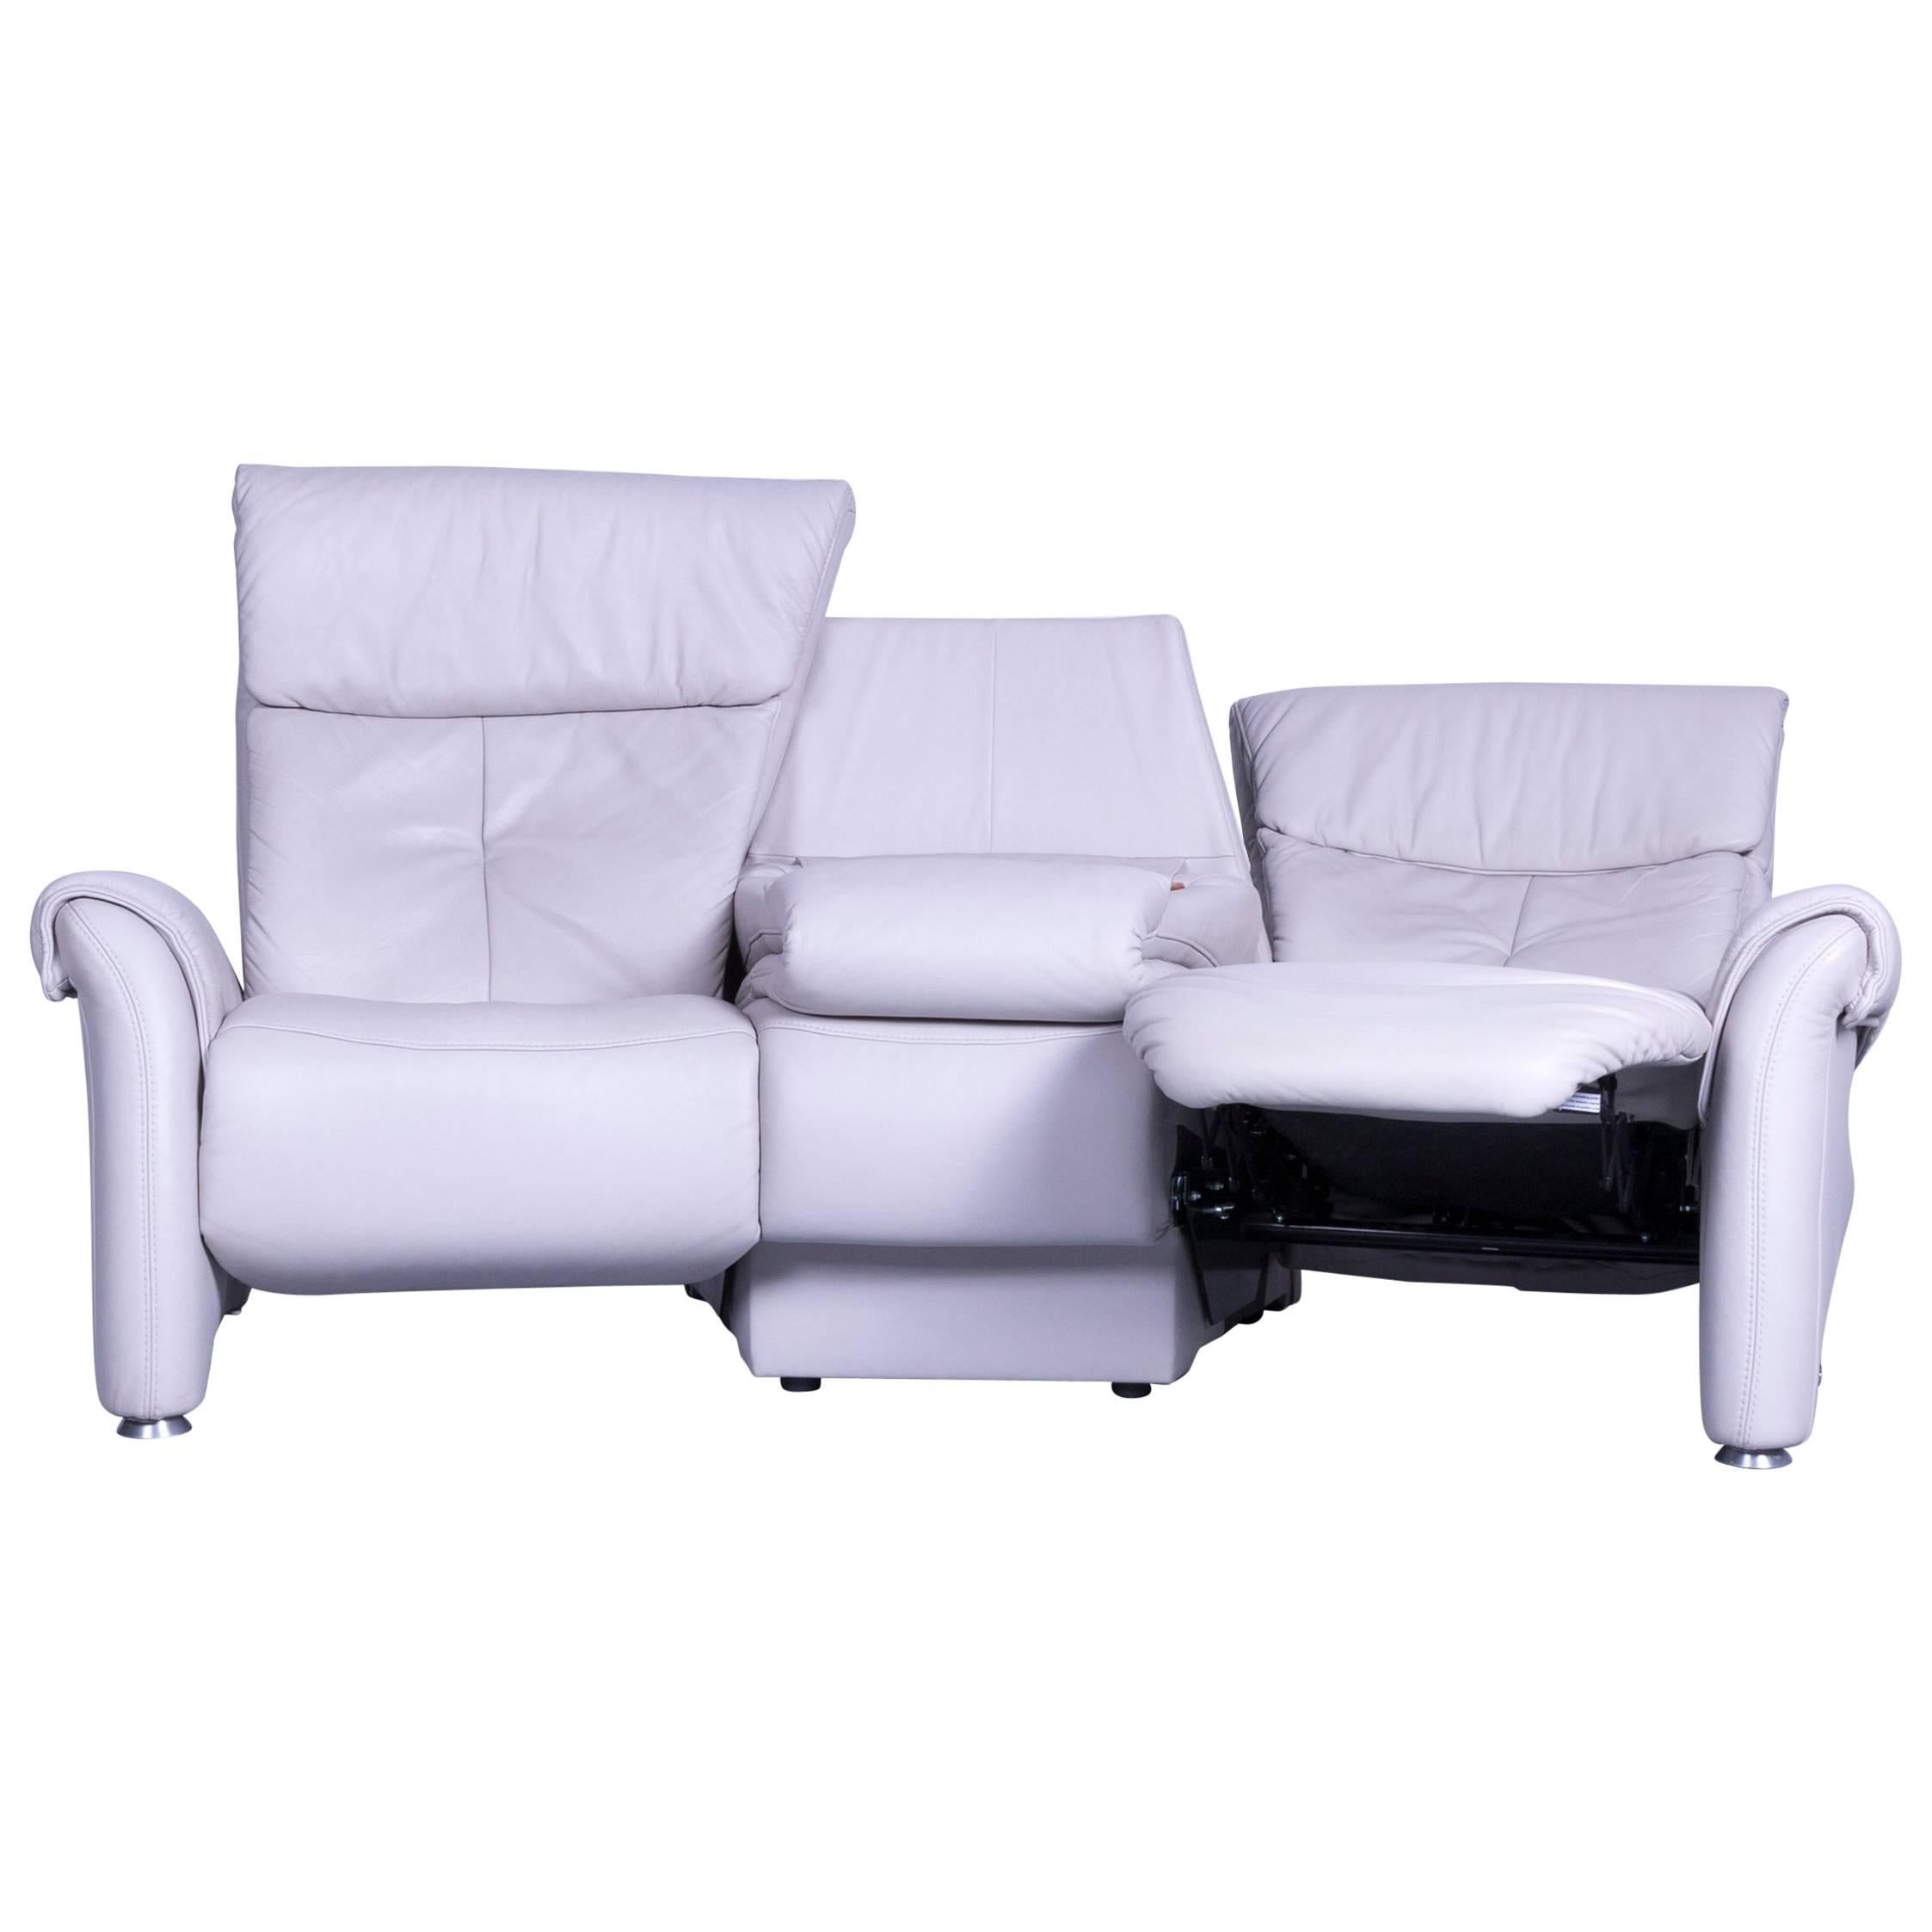 Himolla Designer Sofa Leather Grey Two-Seat Trapez Couch Germany